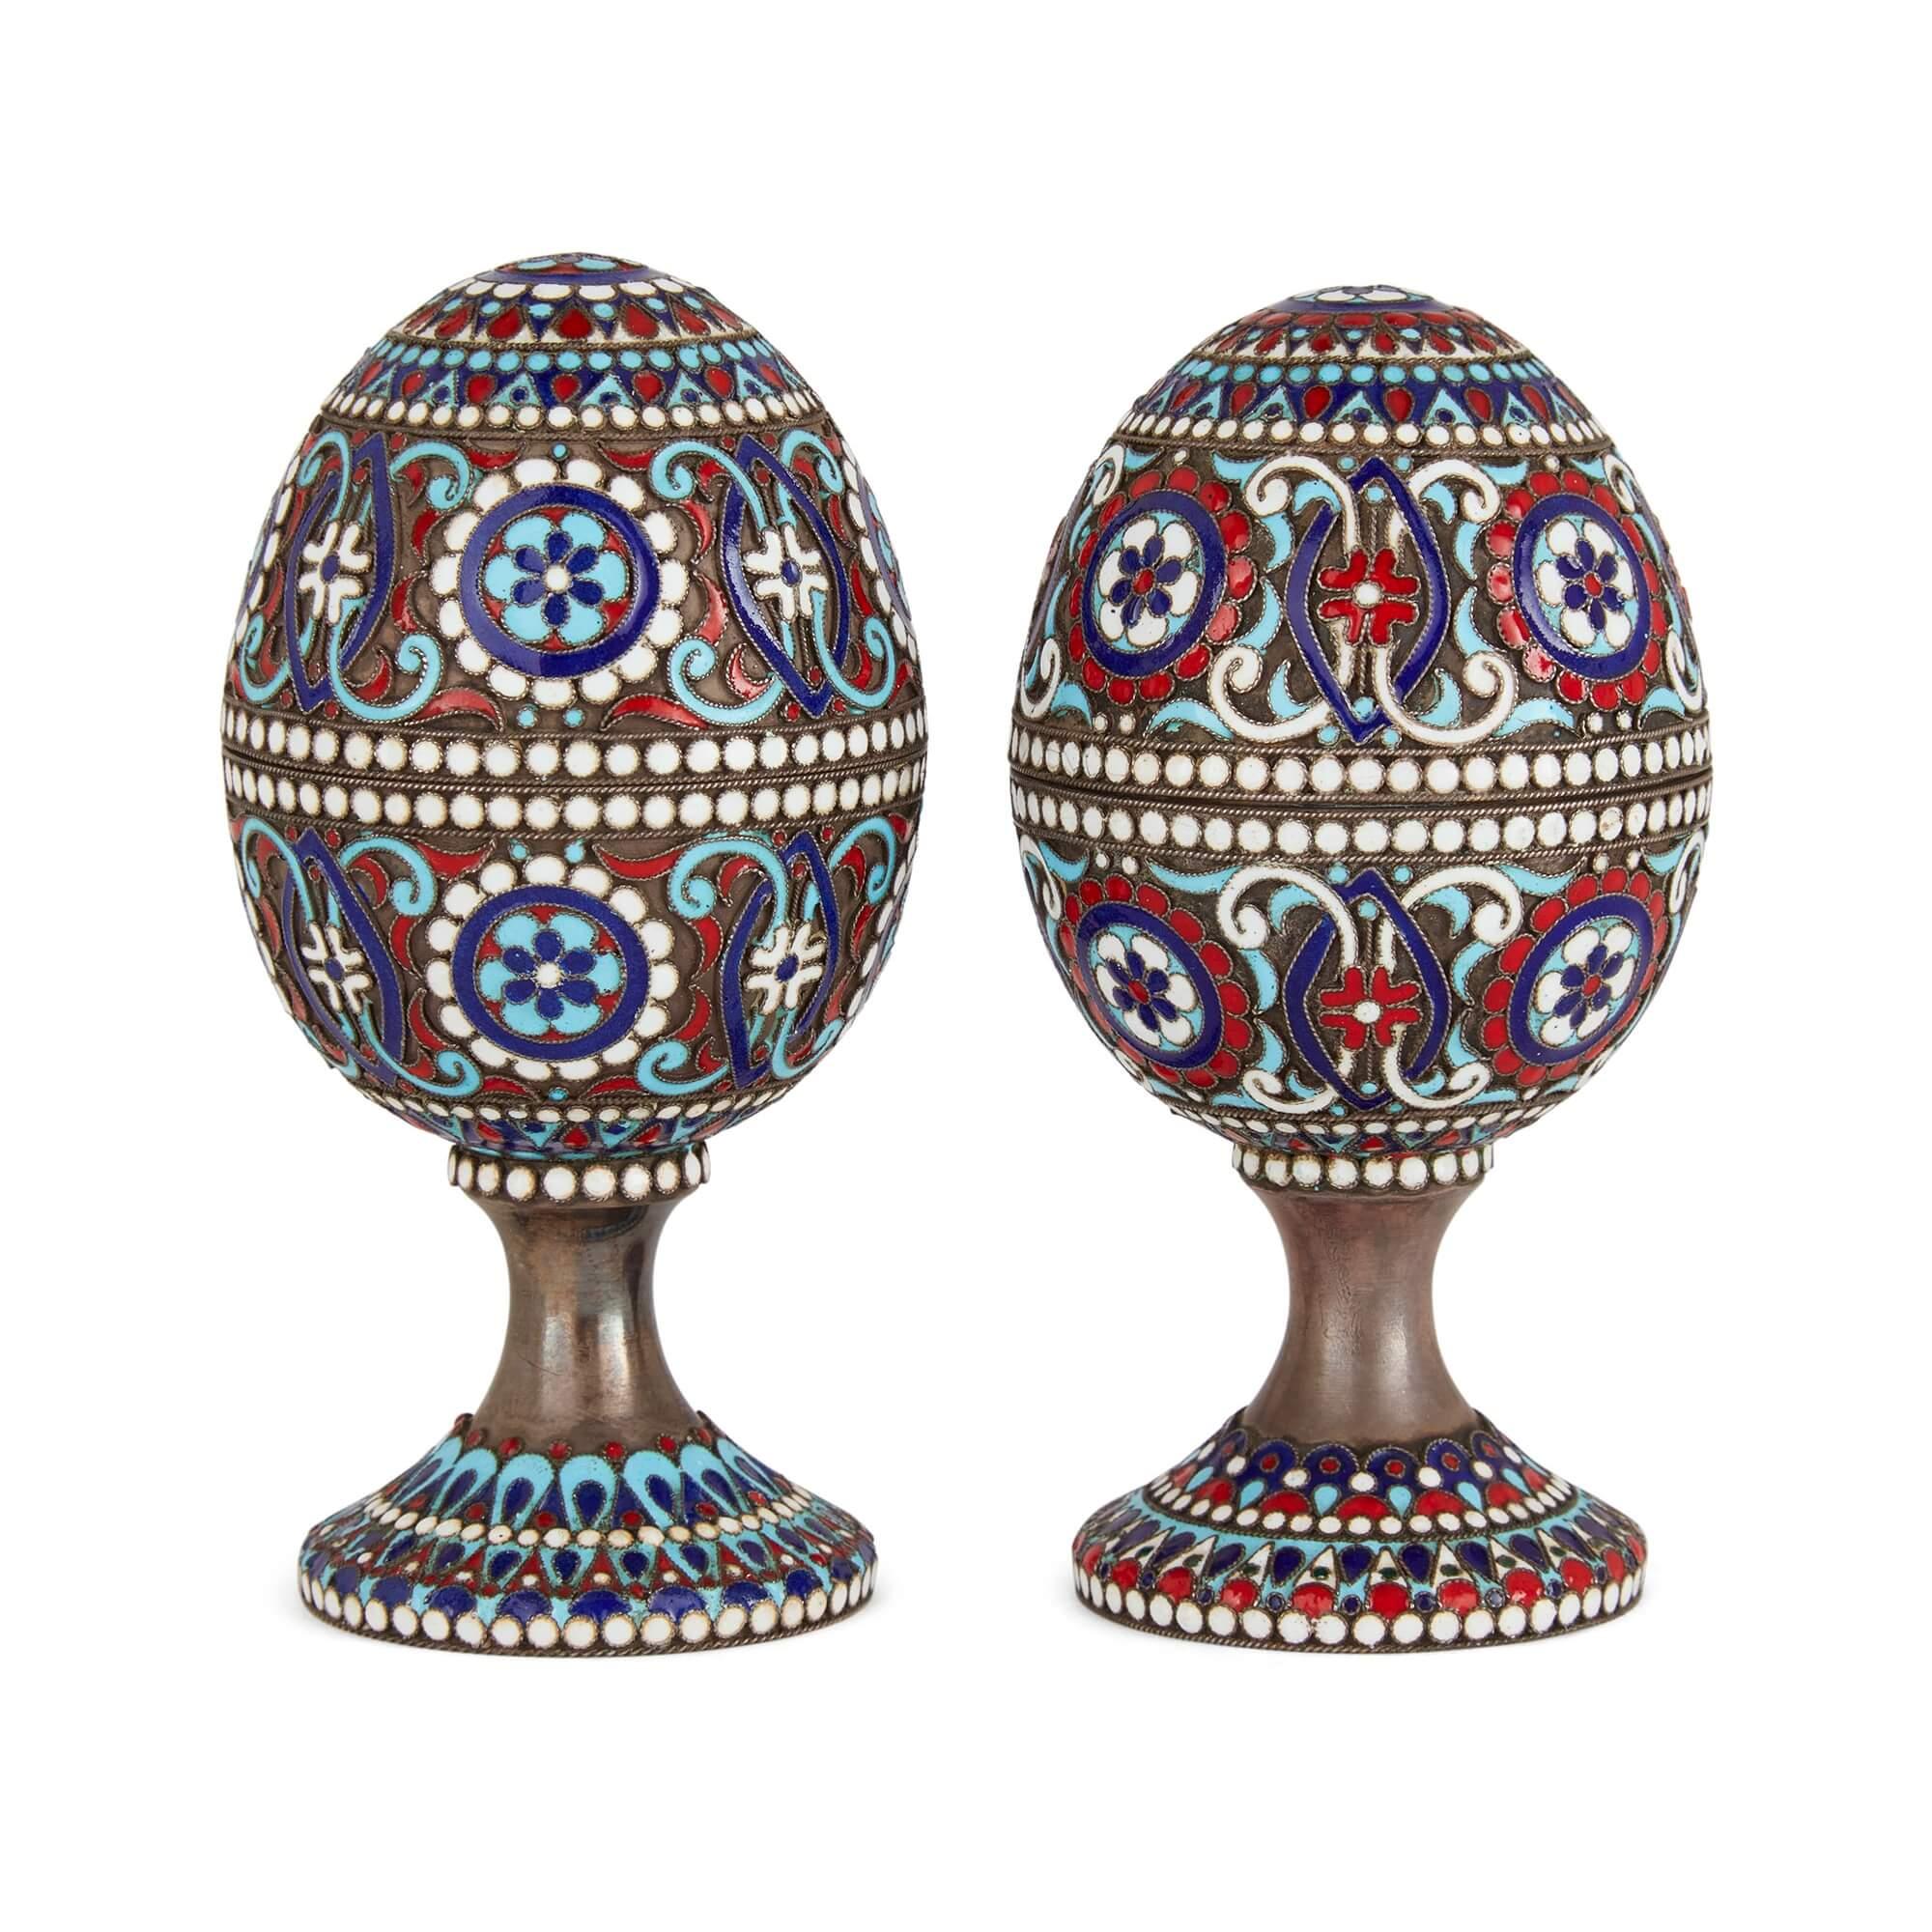 Two Russian silver gilt and cloisonné enamel Easter eggs on stands  
Russian, 20th Century  
Height 9.5cm, diameter 5cm 

The two silver gilt and cloisonné enamel eggs showcase Russia’s long tradition of crafting richly decorated Easter eggs. 